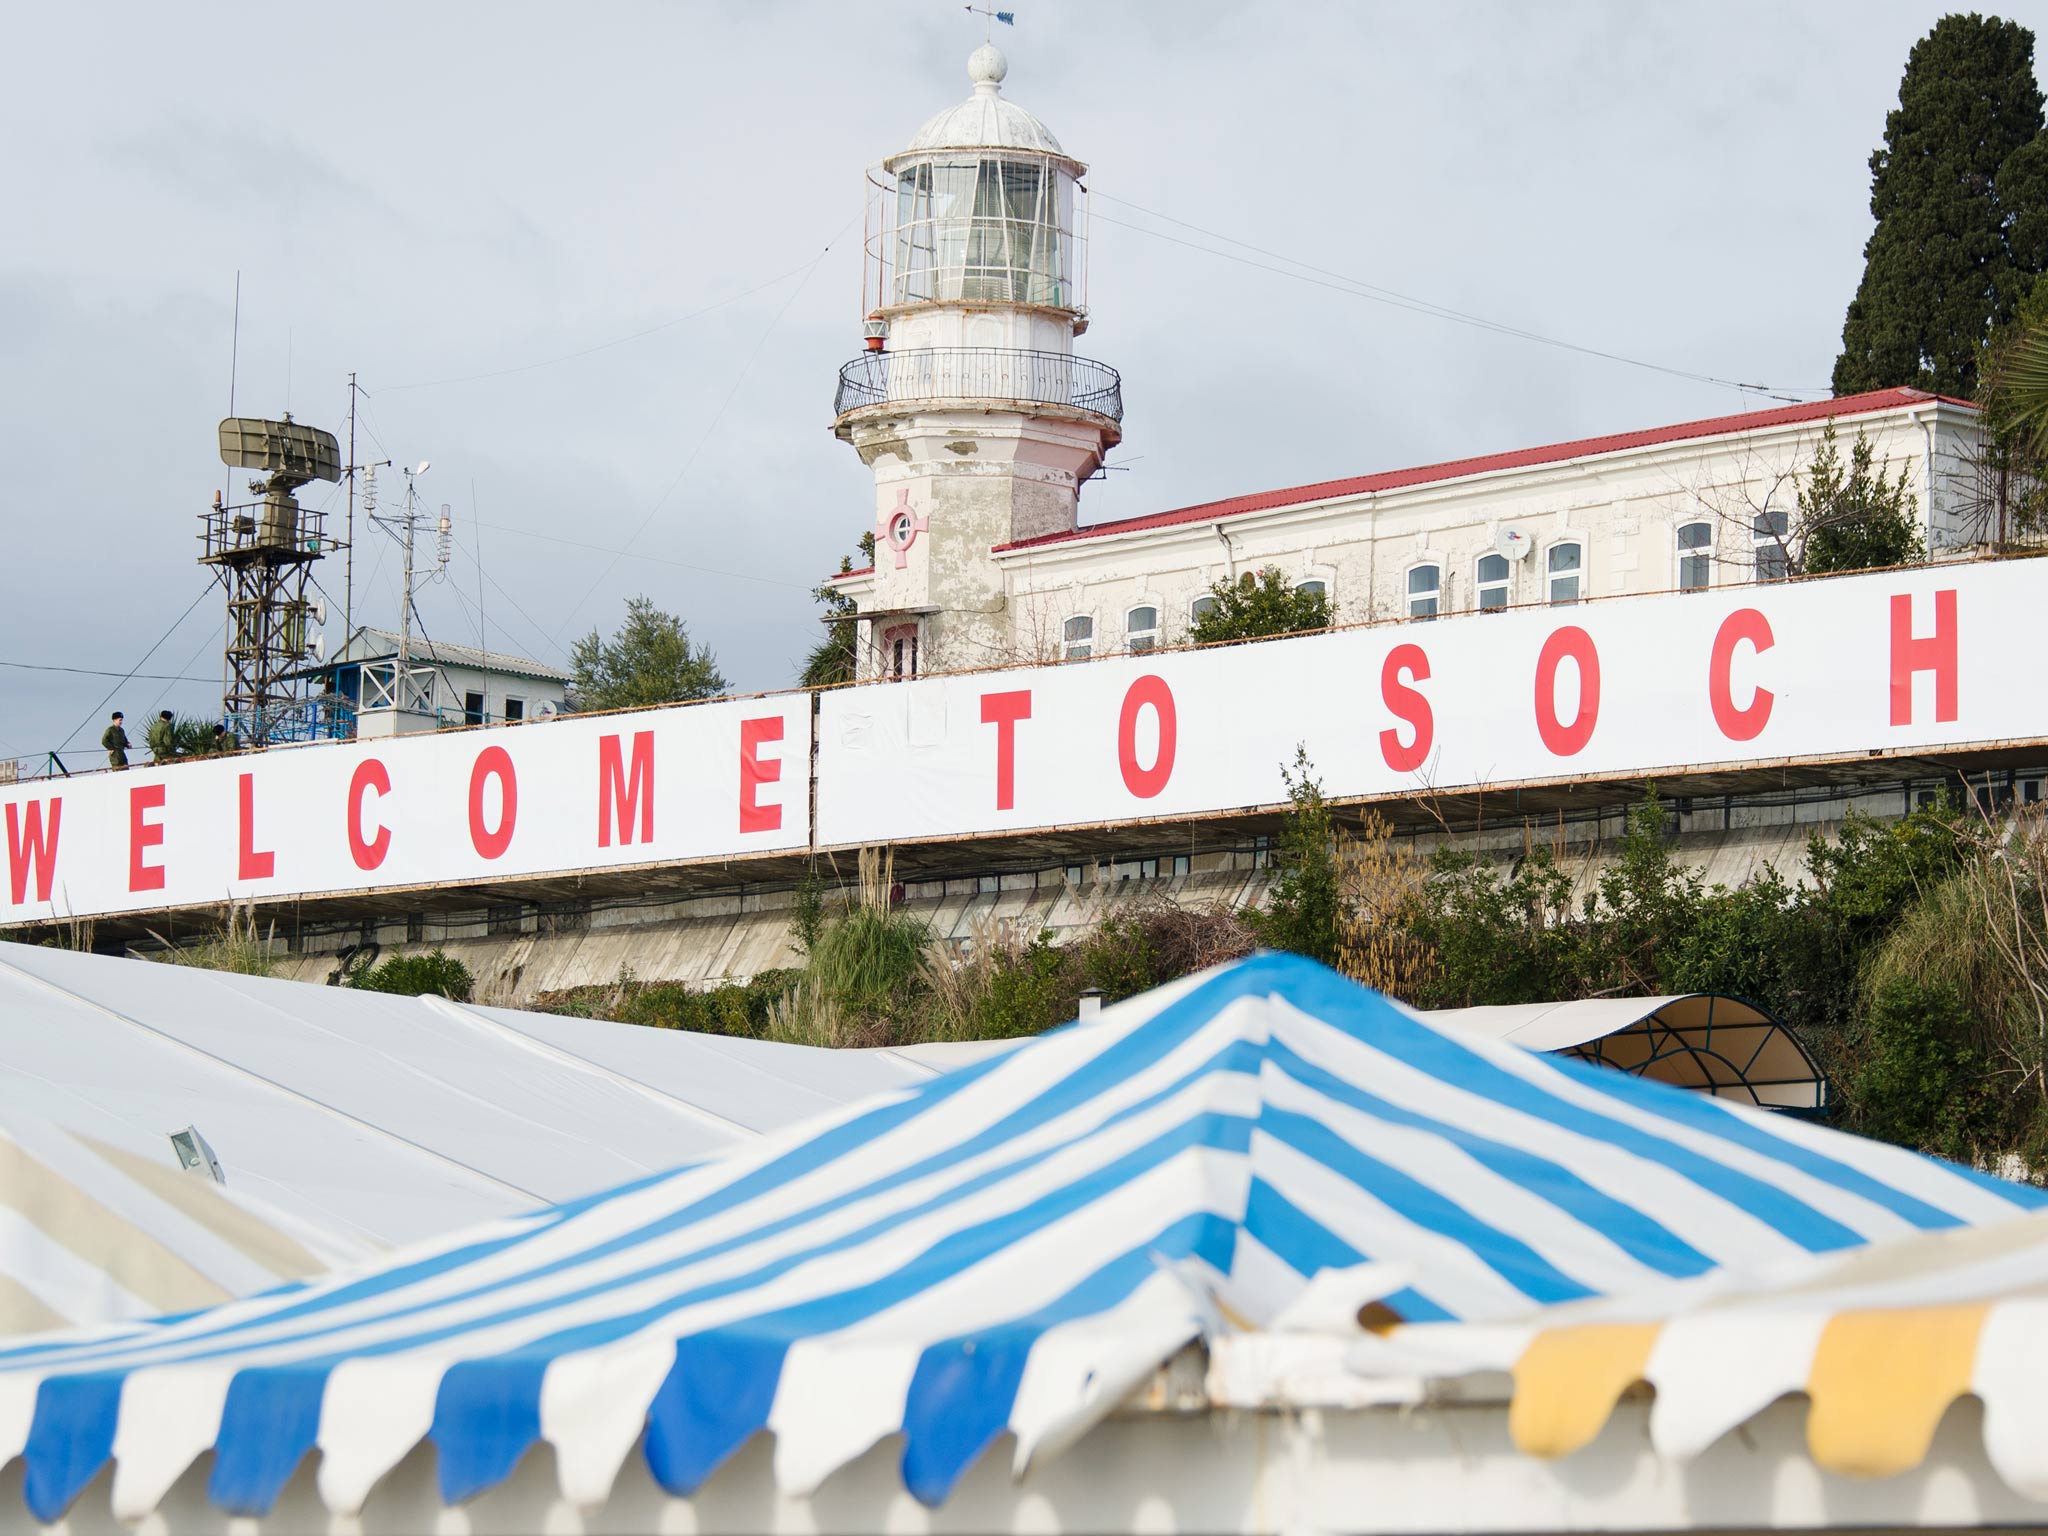 A large 'Welcome to Sochi!' sign hangs above the waterfront area in central Sochi